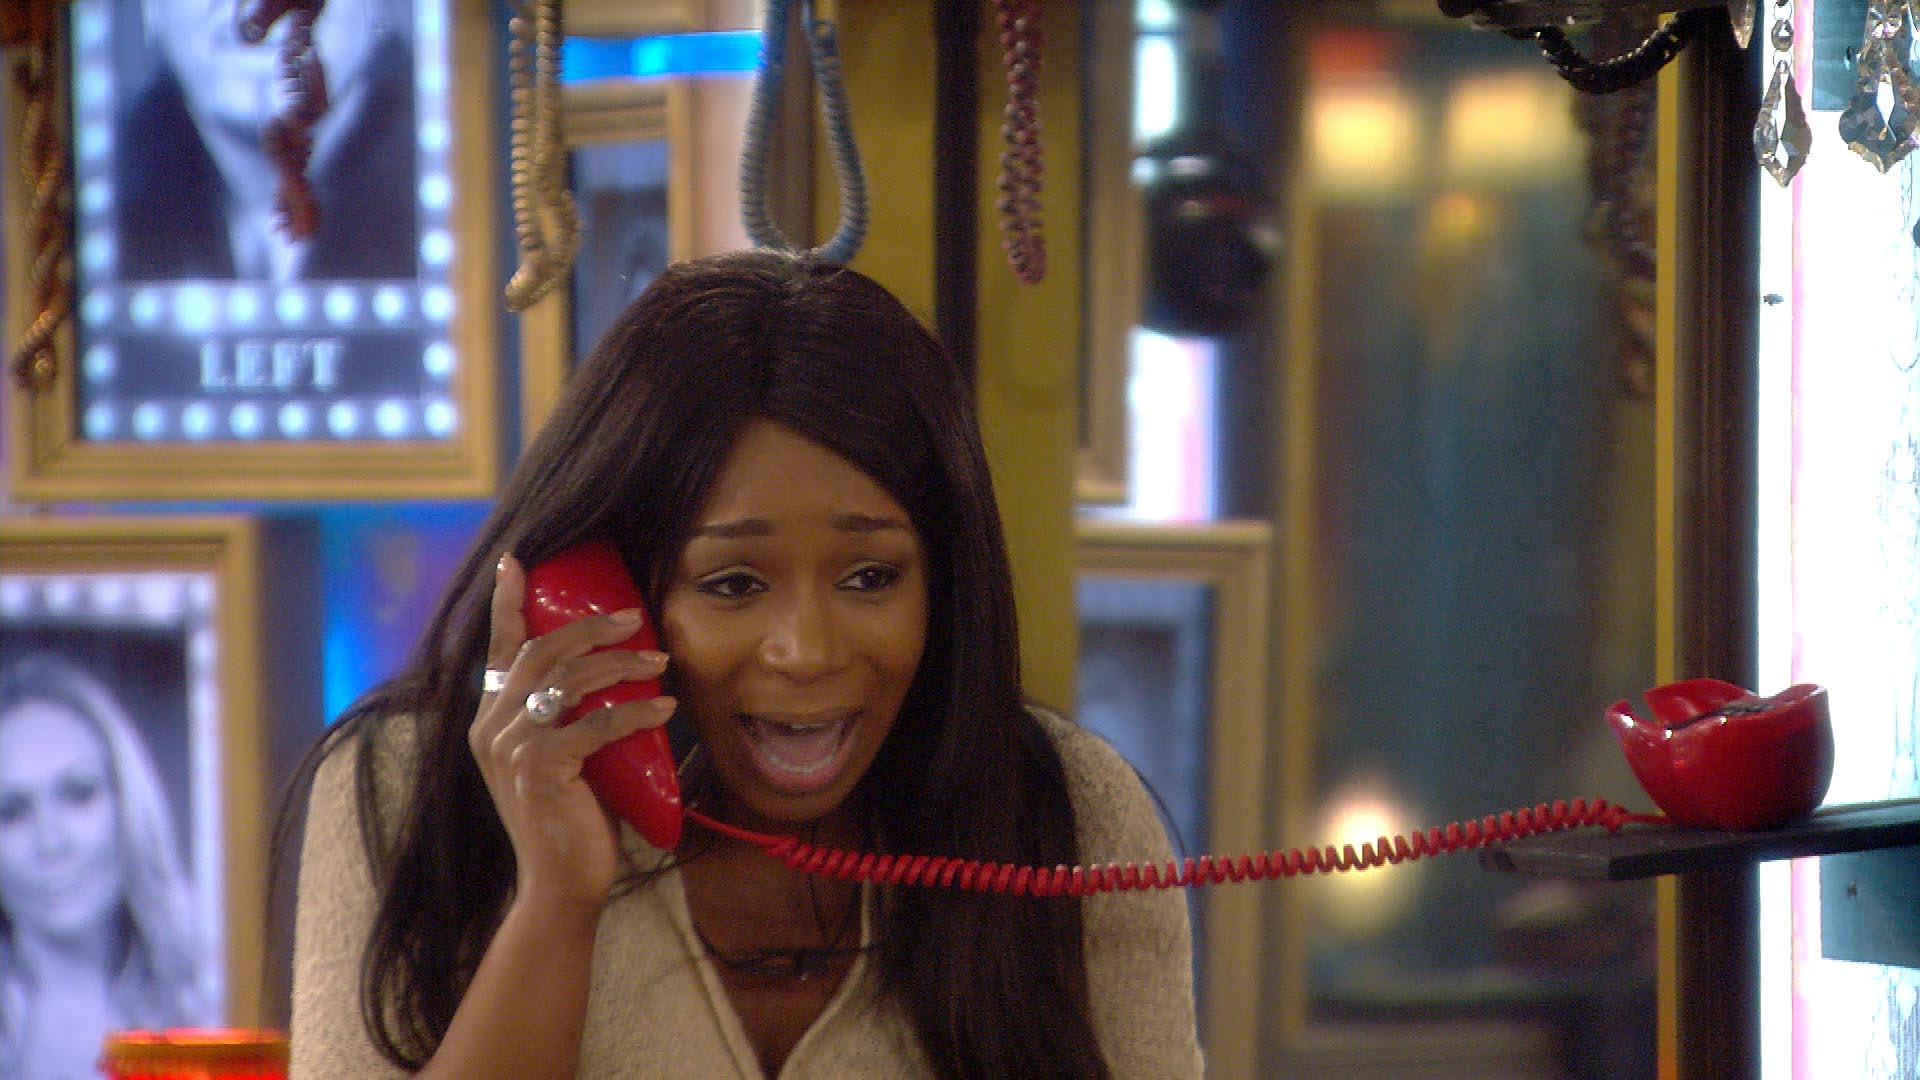 Day 25: Housemates face phone calls in latest shopping task